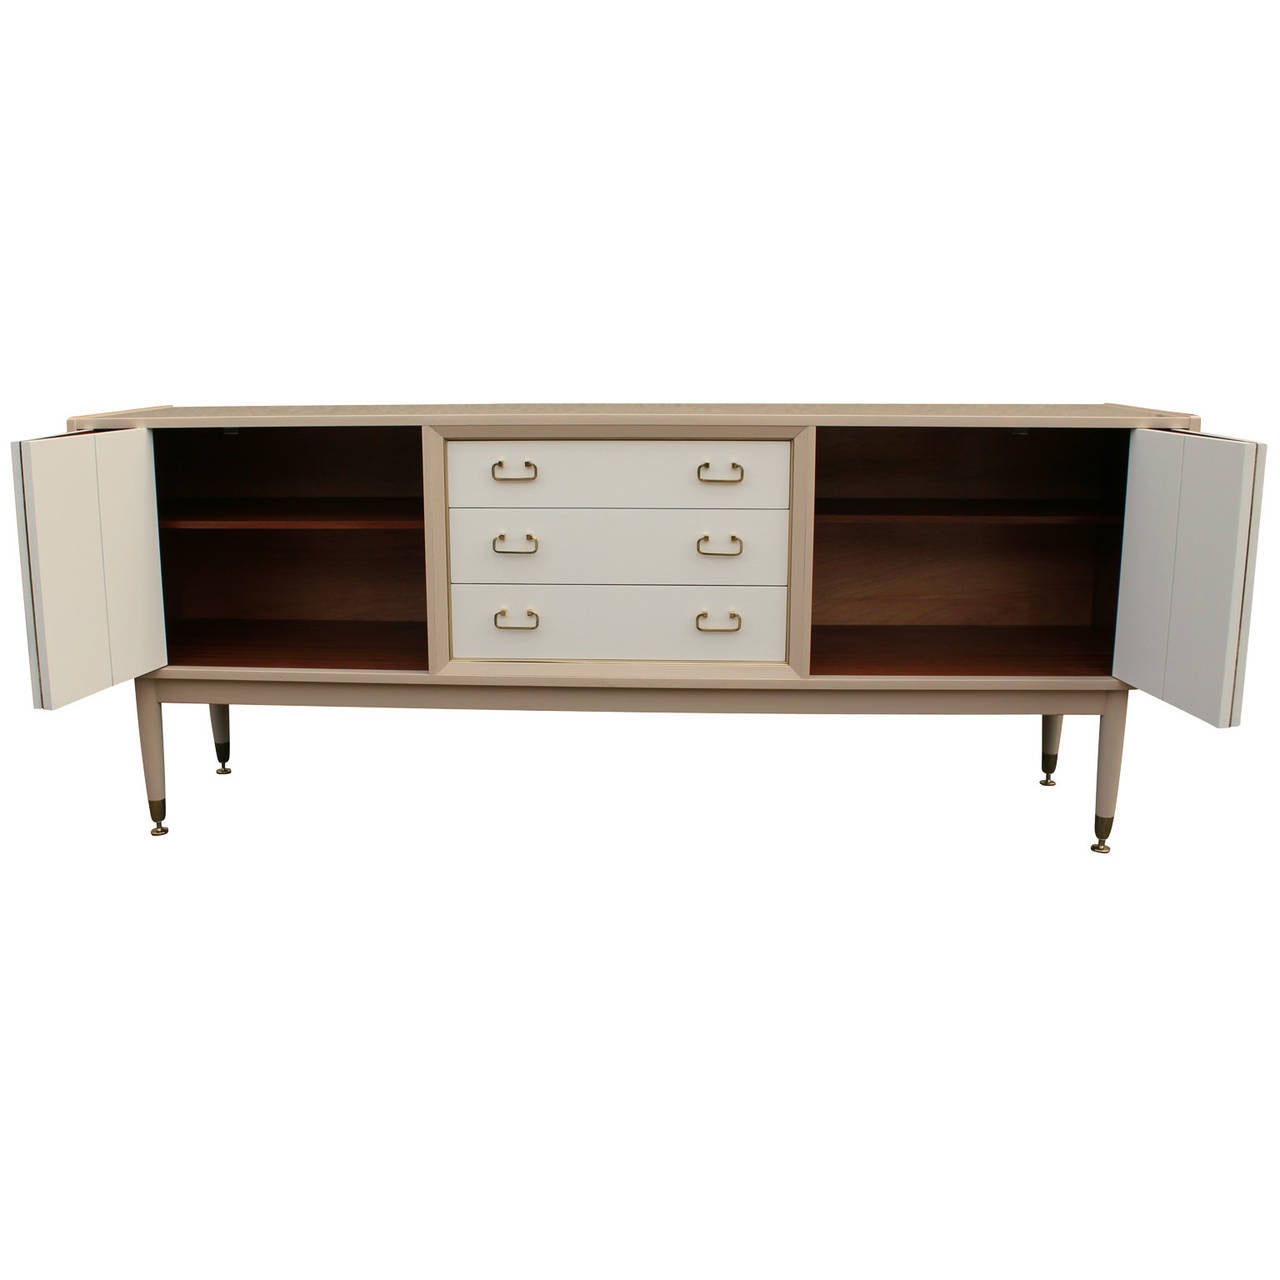 Hollywood Regency Beautiful Tone on Tone Cream Lacquered Brass Sideboard